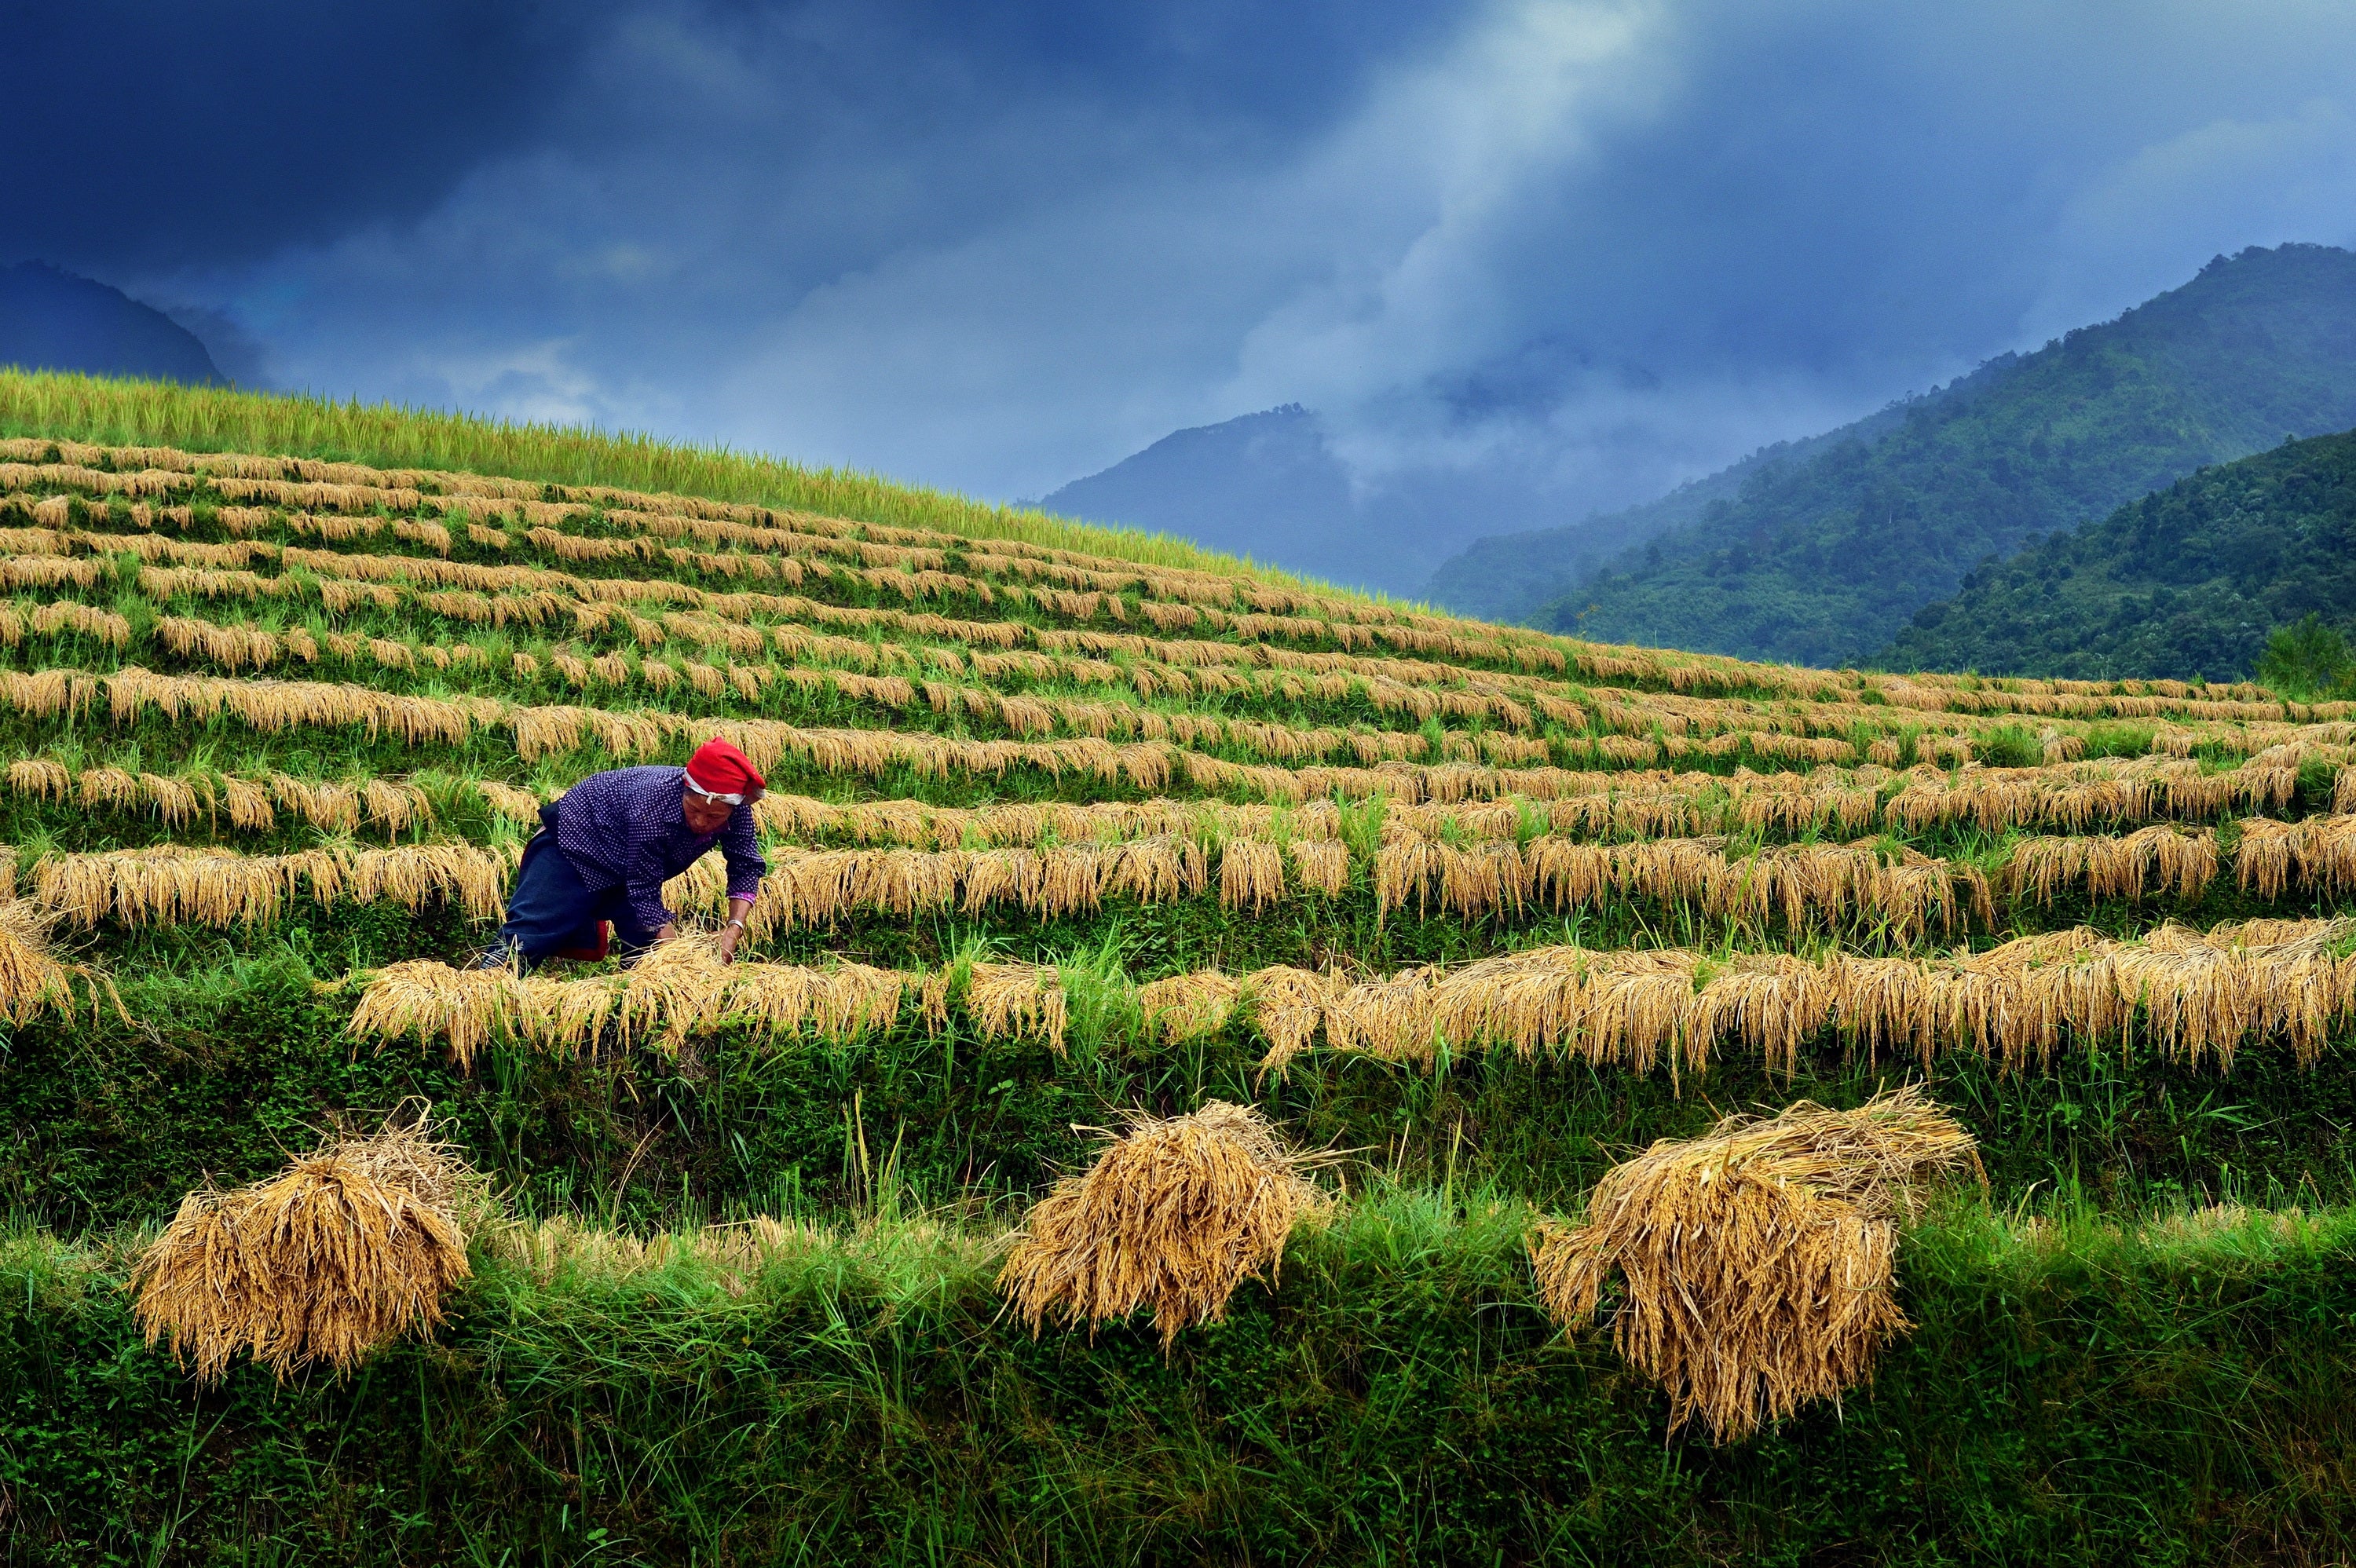 A woman works in a field. Photo by Hoang Long Ly